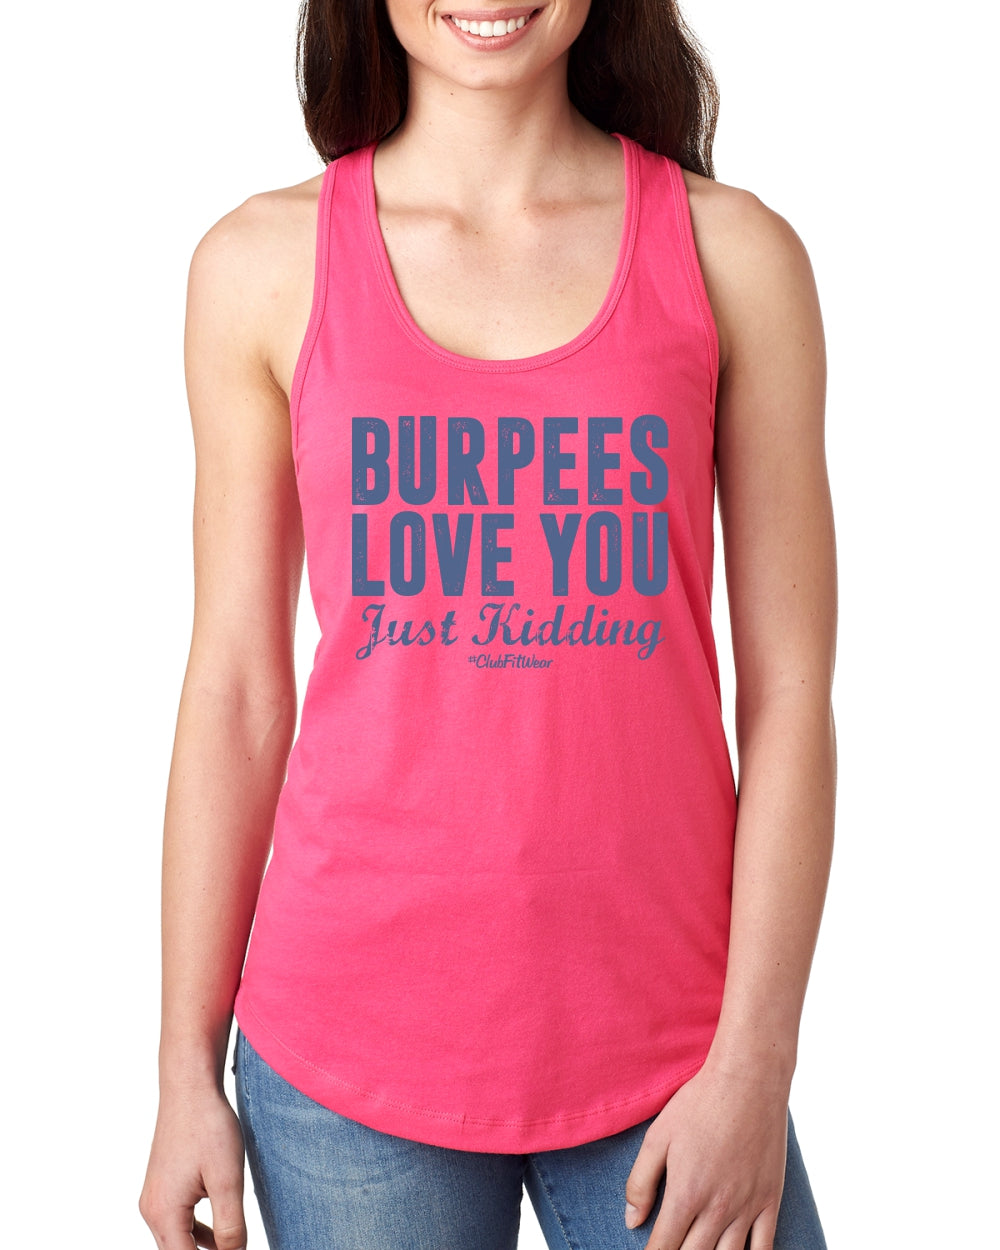 Burpees Love You Just Kidding